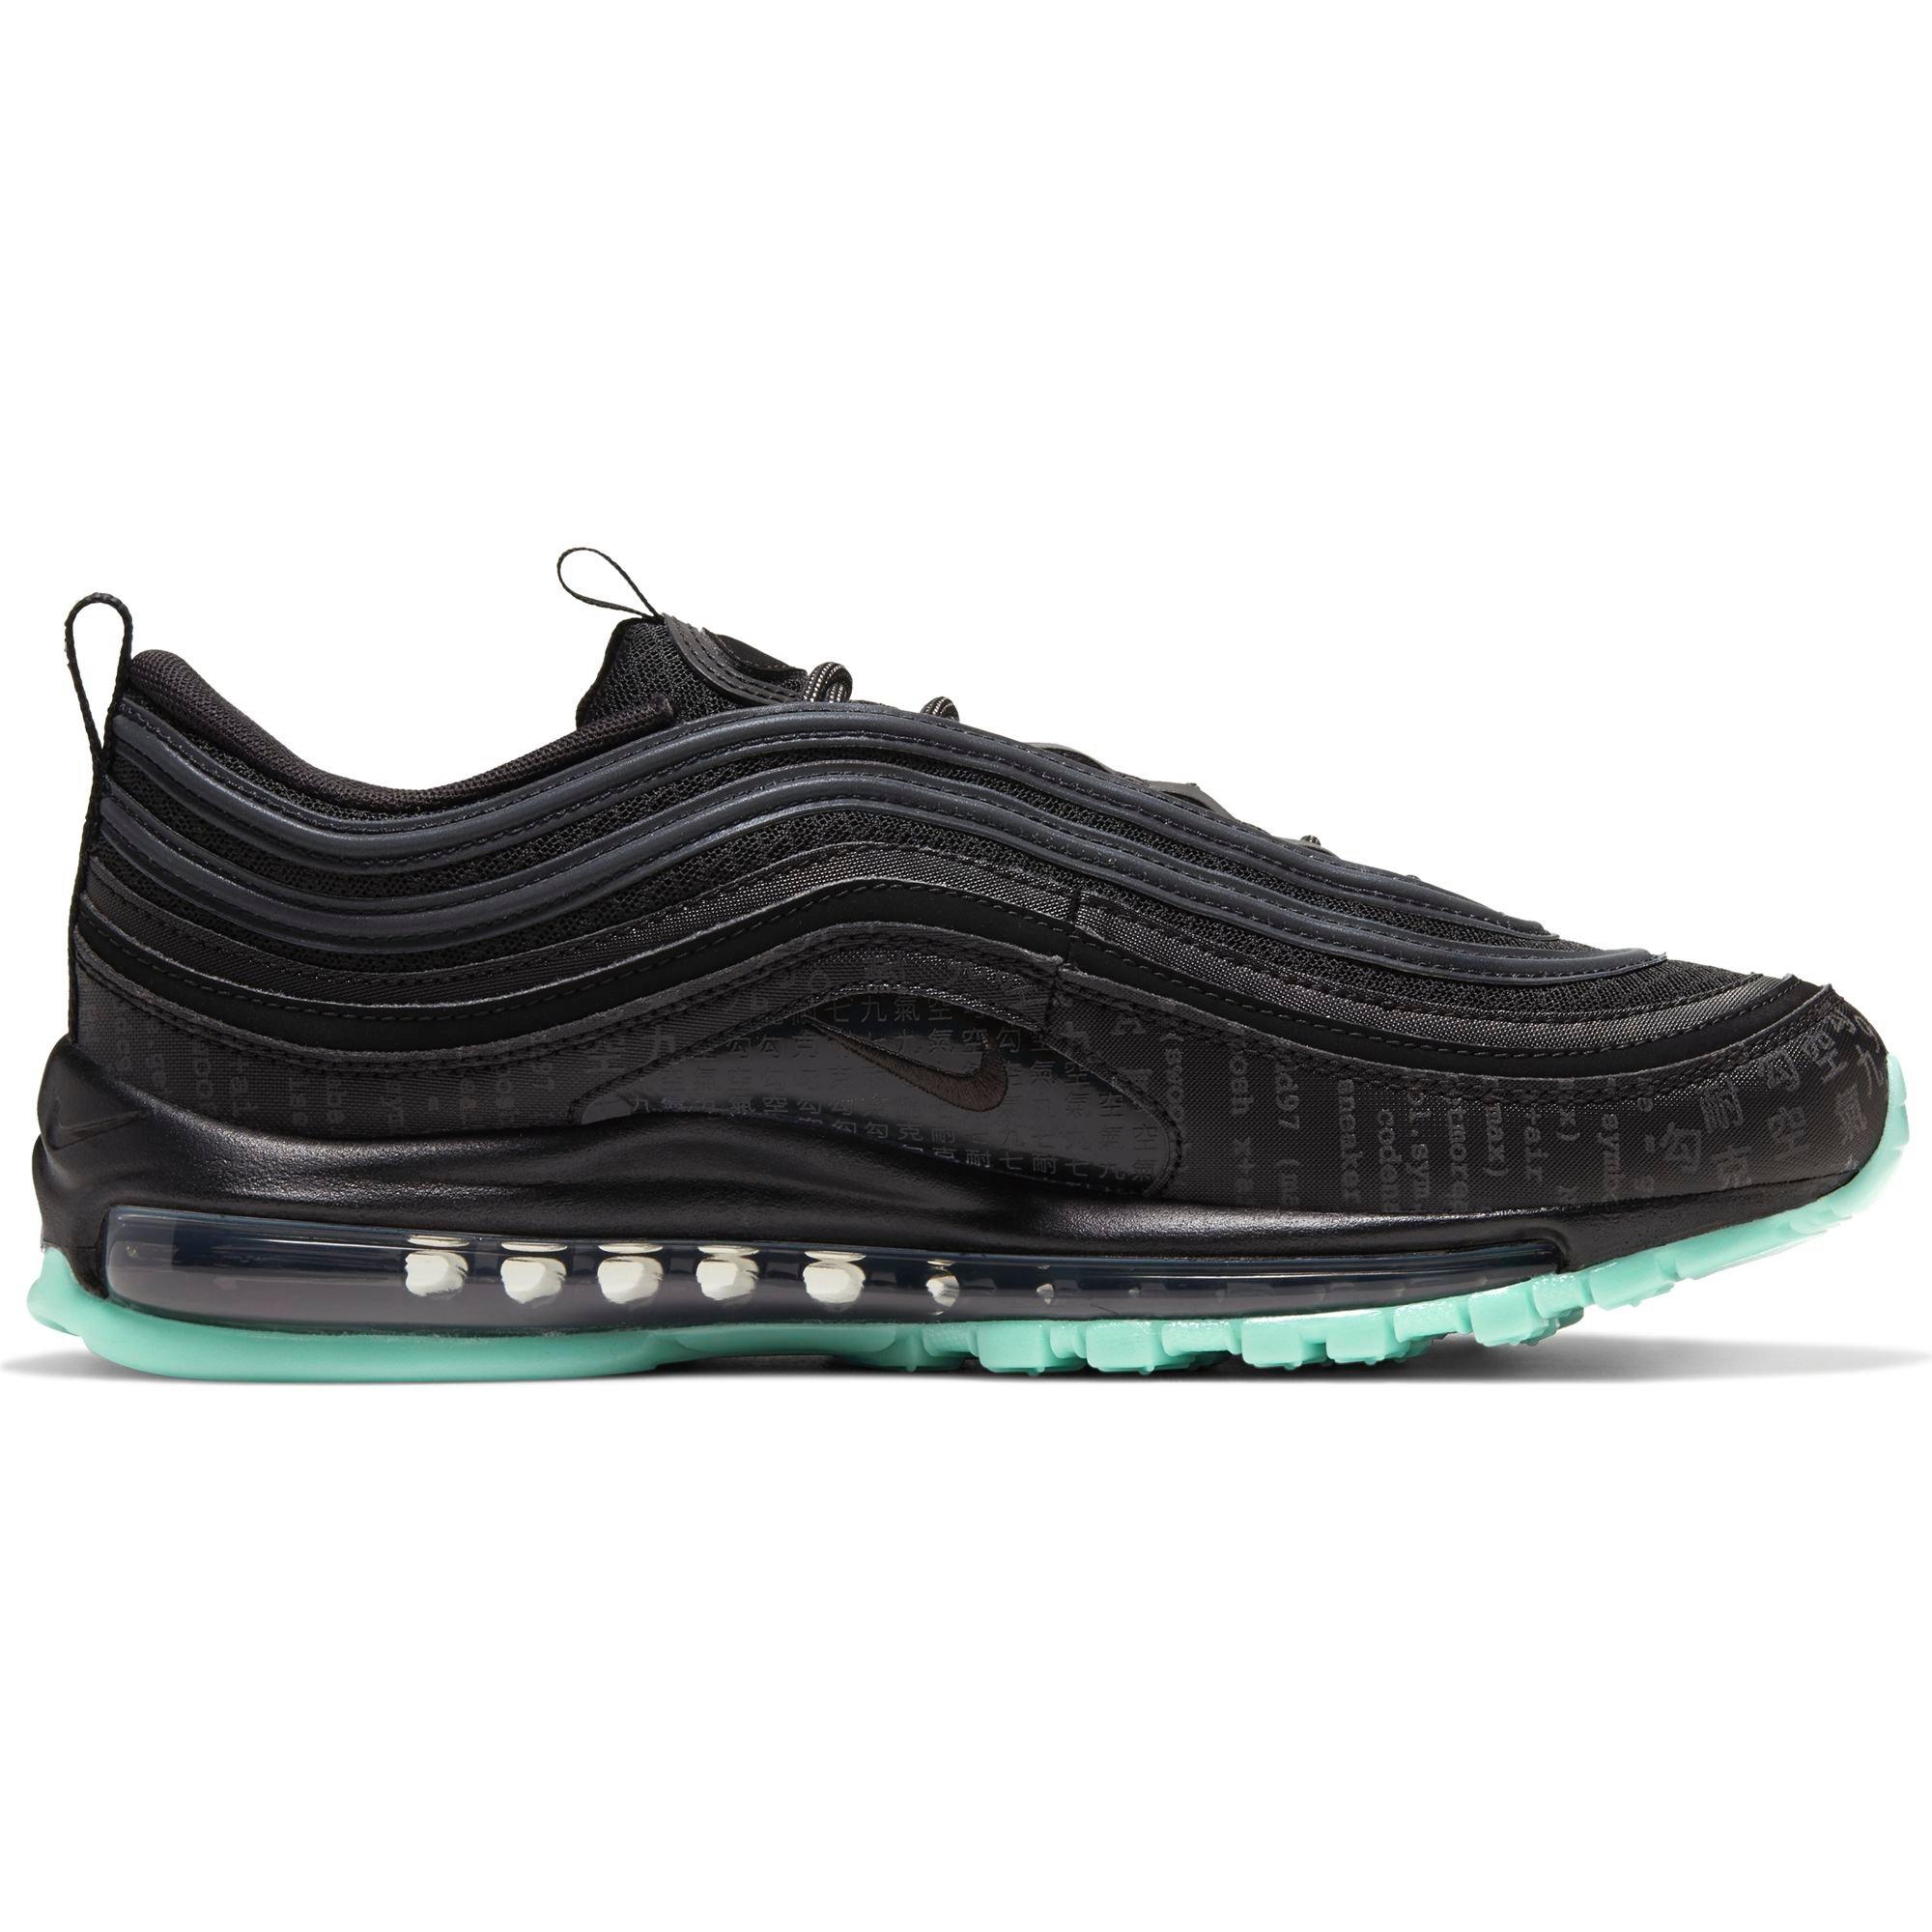 green and black 97